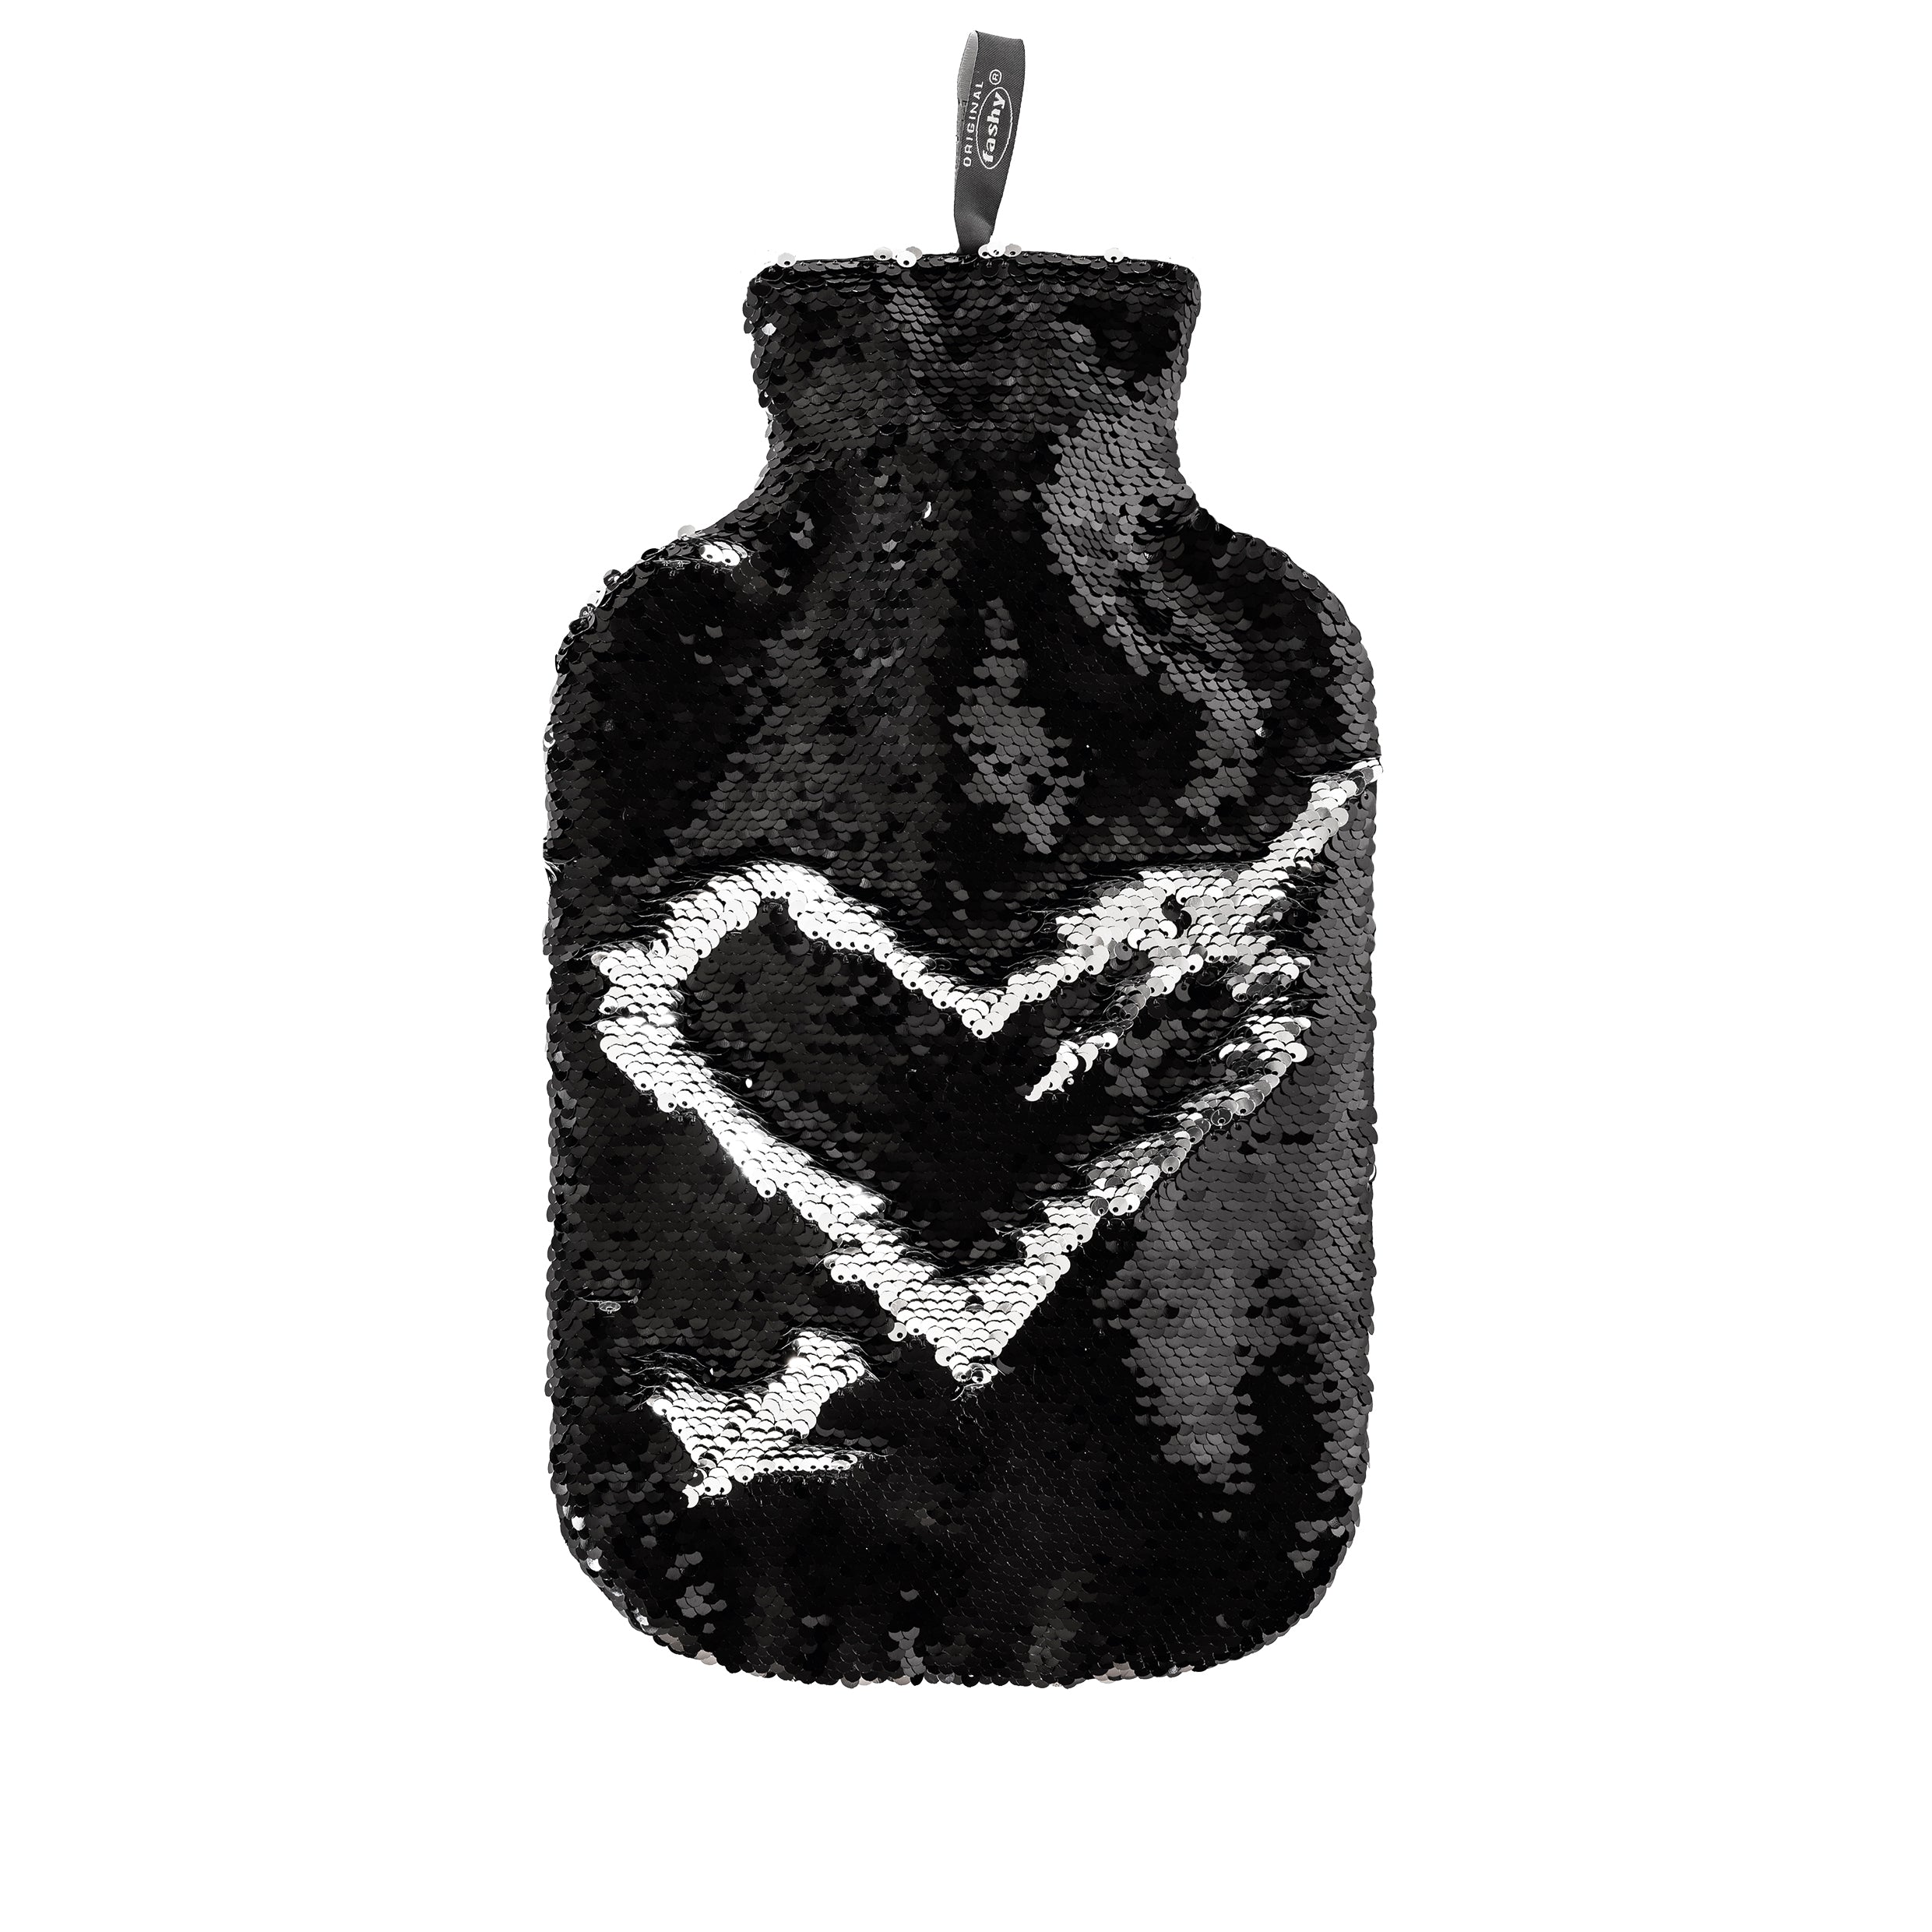 2 Litre Fashy Hot Water Bottle with Black Sequin Cover - Heart